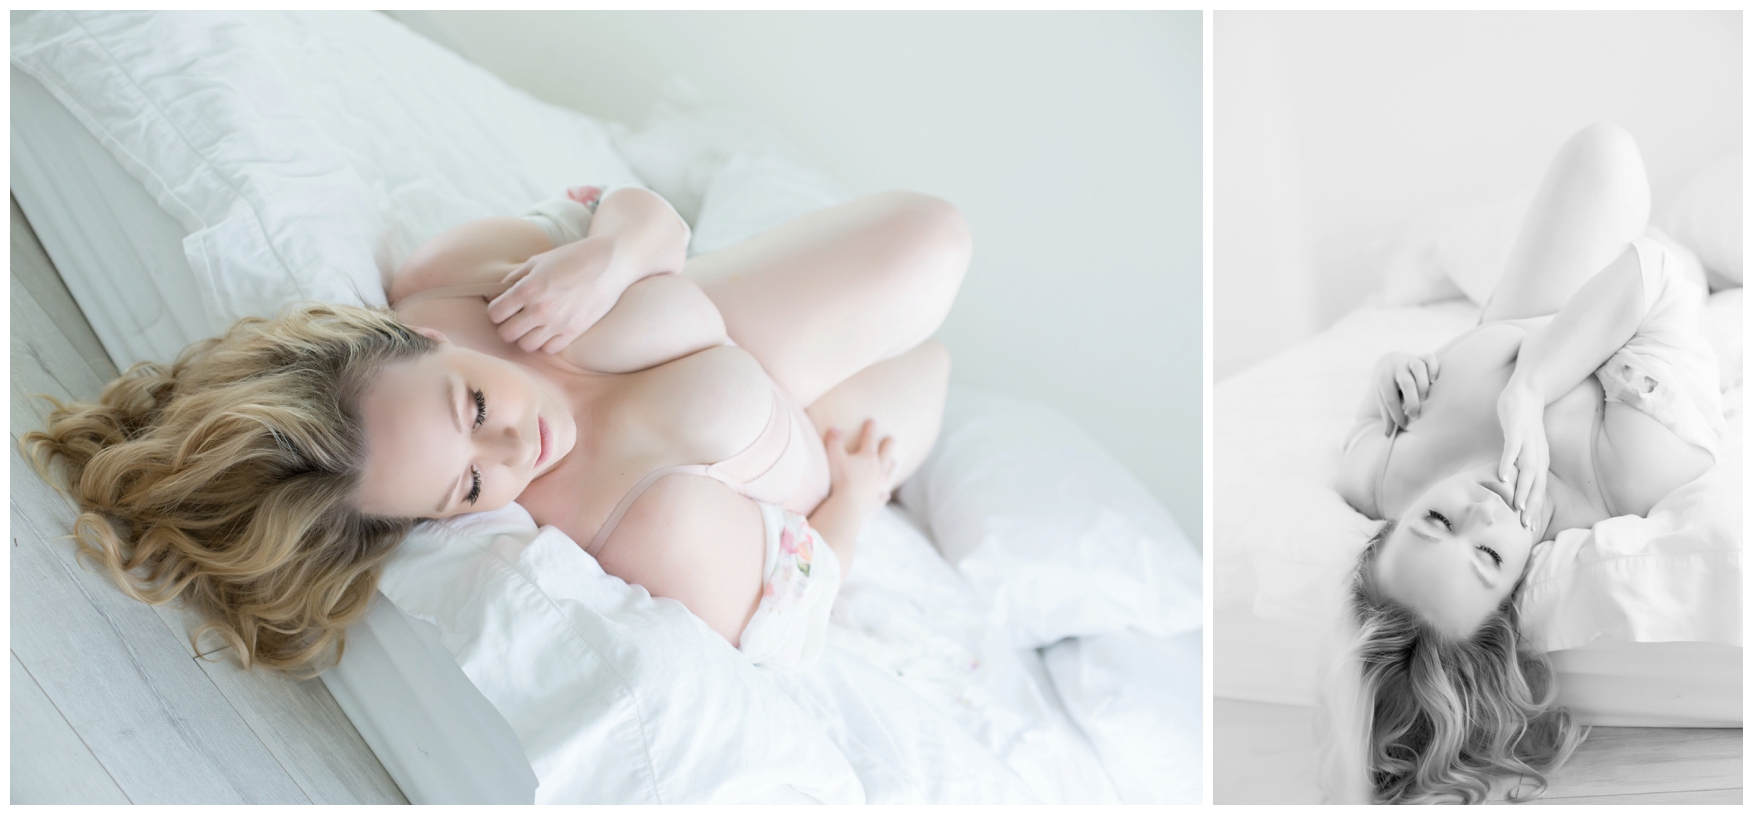 Why A Boudoir Photo Shoot Can Remind You Of How Amazing Your